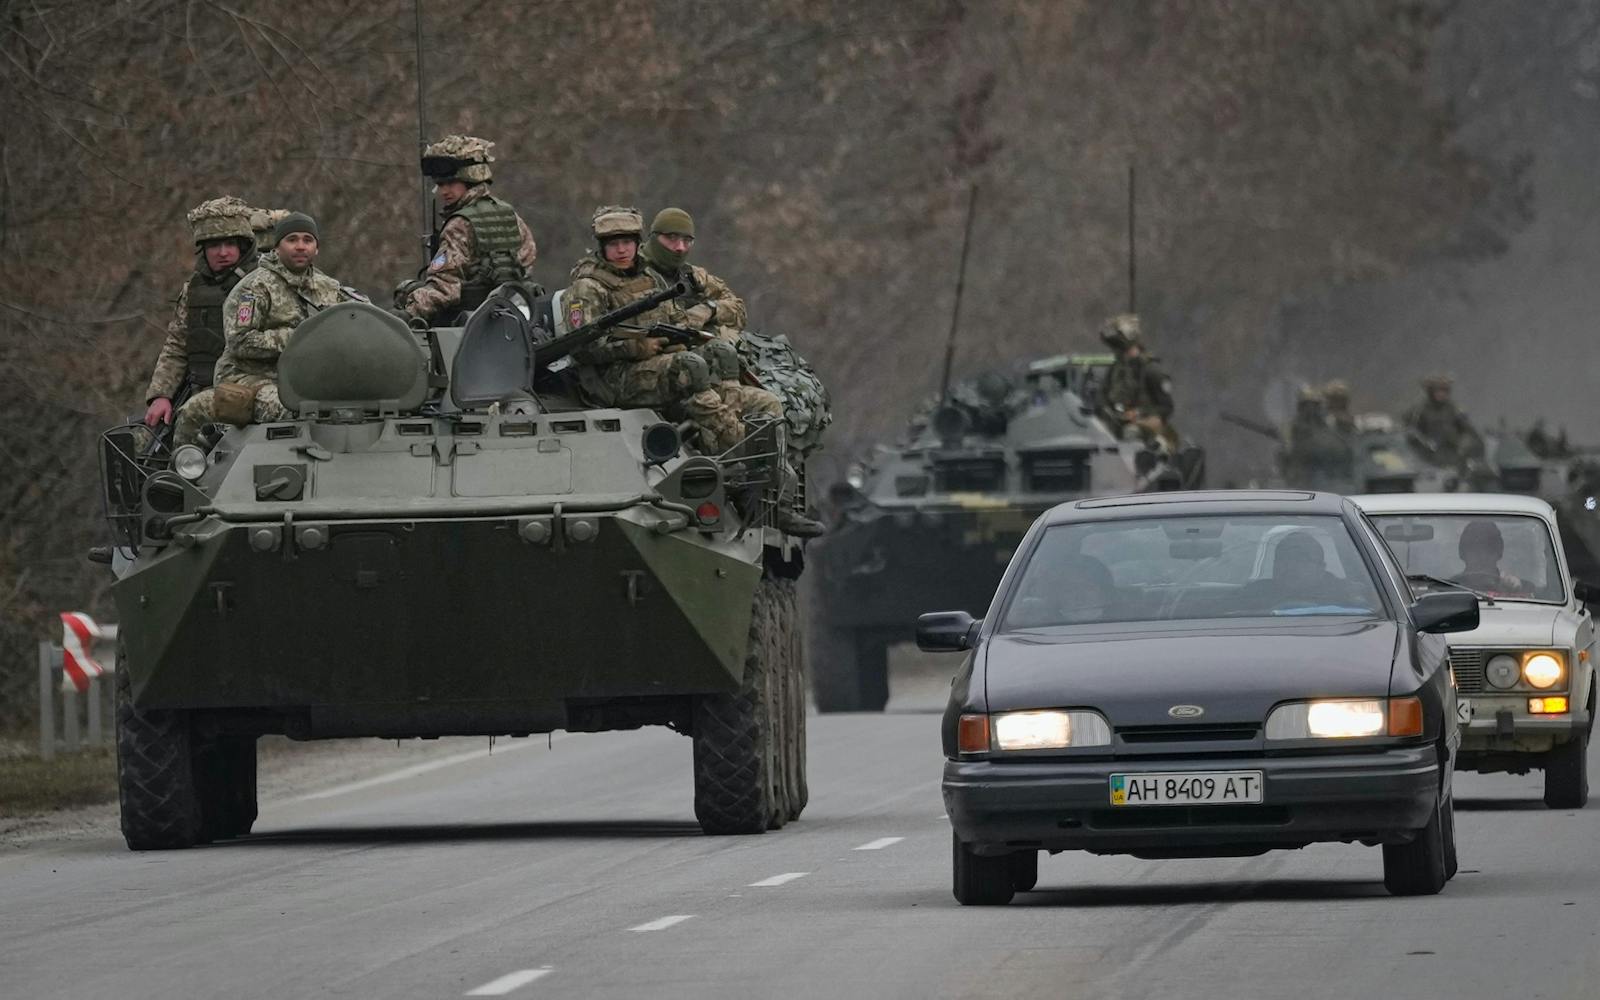 Ukrainian servicemen sit atop armored personnel carriers driving on a road in the Donetsk region, eastern Ukraine on Feb. 24, 2022. Photo: AP